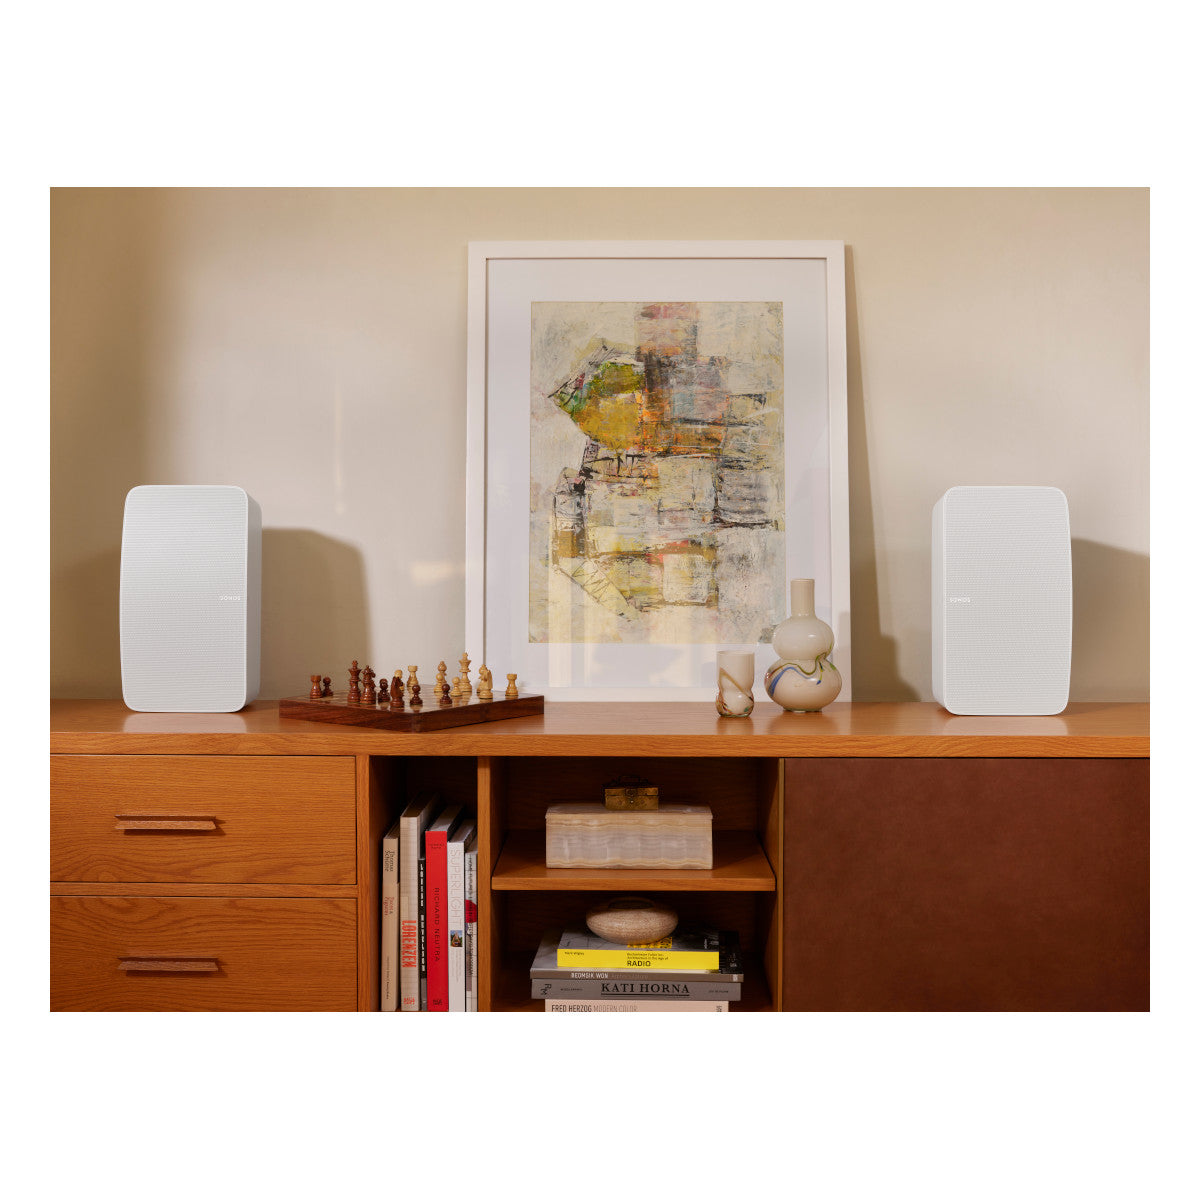 Victrola Stream Onyx Works with Sonos Wireless Turntable with Sonos Five Wireless Speaker for Streaming Music (White)